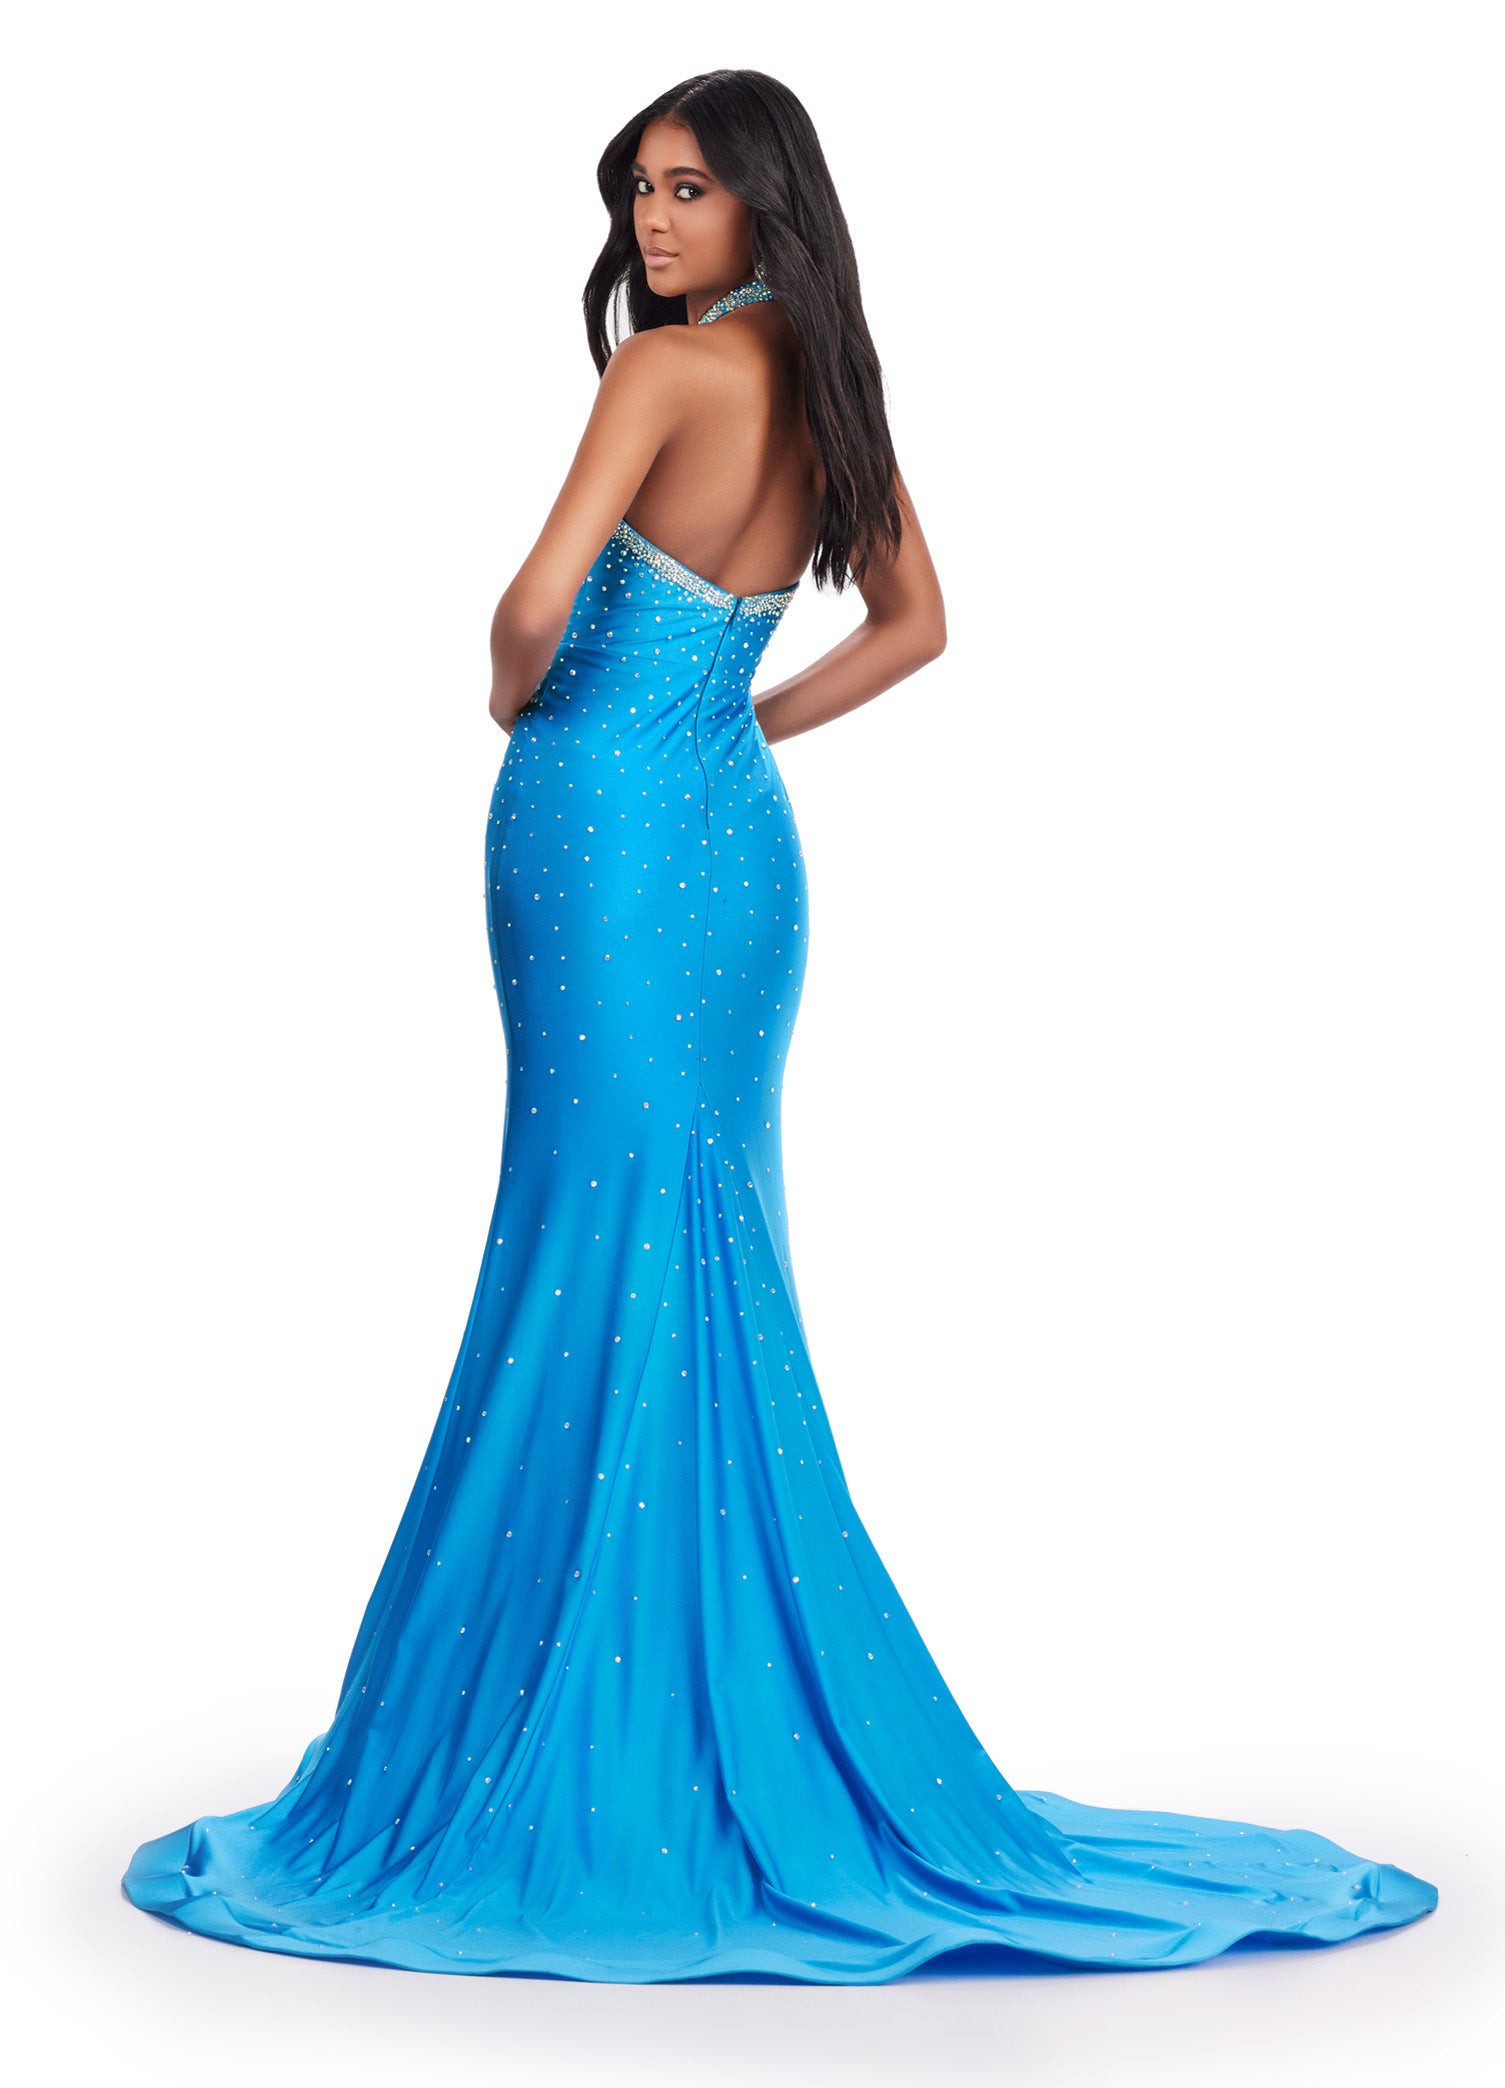 Be the star of the prom with the Ashley Lauren 11578 Long Prom Dress. Designed with a mermaid silhouette and cut-outs, this elegant gown is made of high-quality jersey fabric. The dress also features press on stones, adding a touch of glamour. Perfect for formal events and pageants. Dance the night away in this edgy and fabulous jersey gown. This dress features a halter design with cut outs and press on stones make this dress stand out.